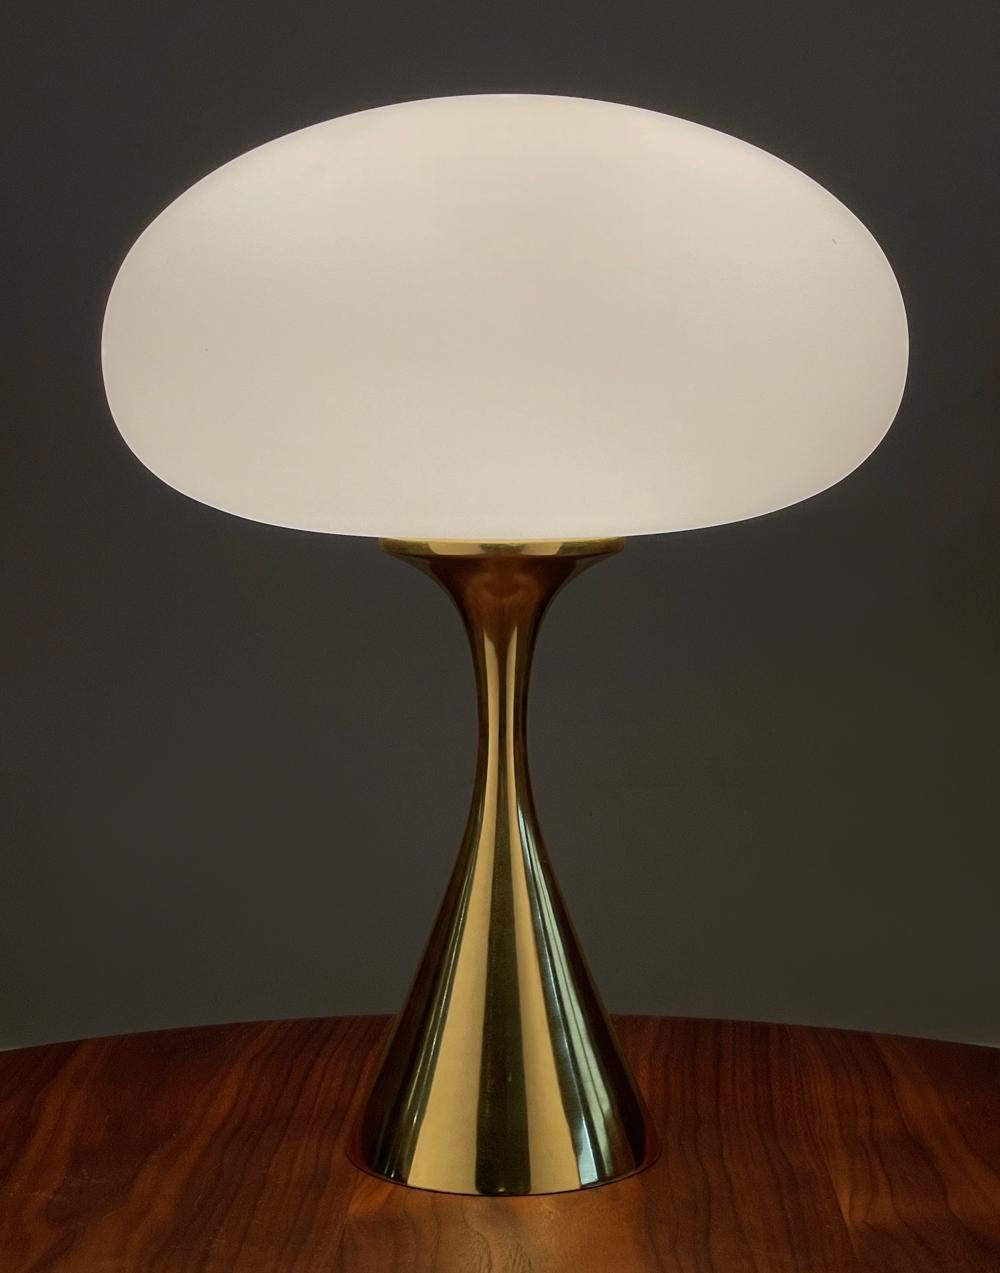 Aluminum Pair of Mid-Century Modern Table Lamps by Designline in Brass & White Glass